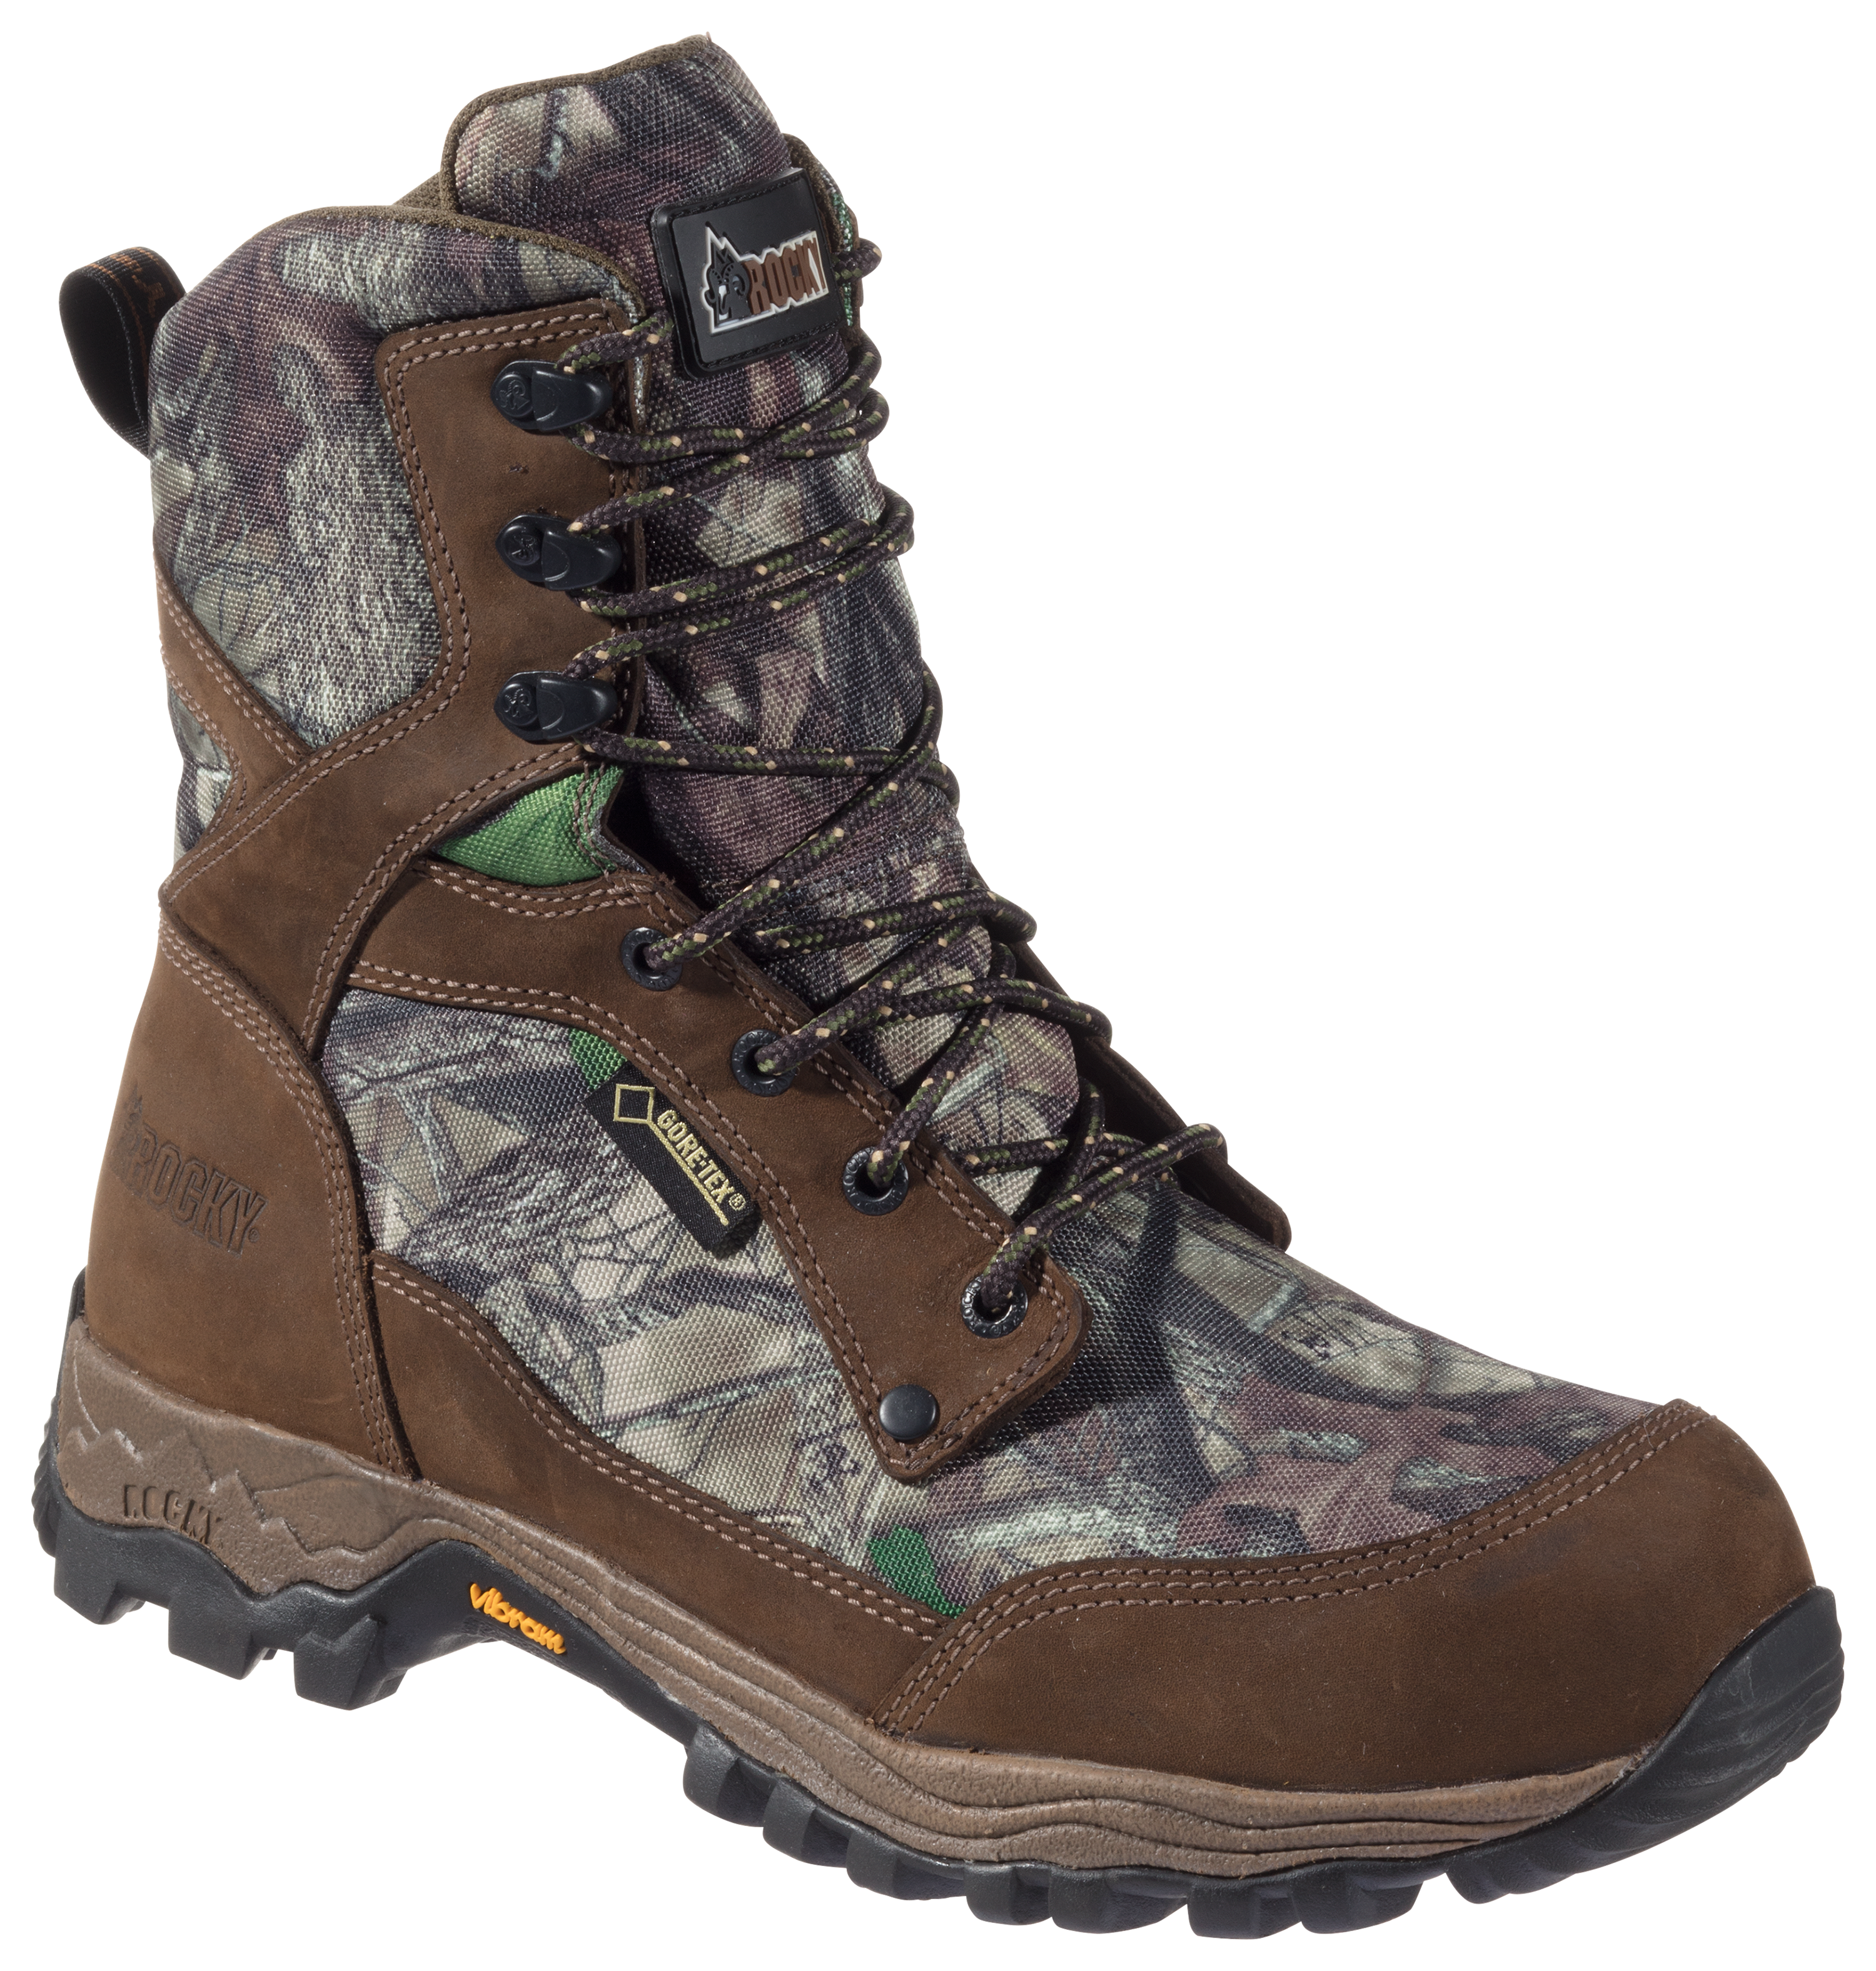 Cabelas Cabela's Leather Camo Insulated Gor-Tex Hunting Hiking boots men's size 8.5D 